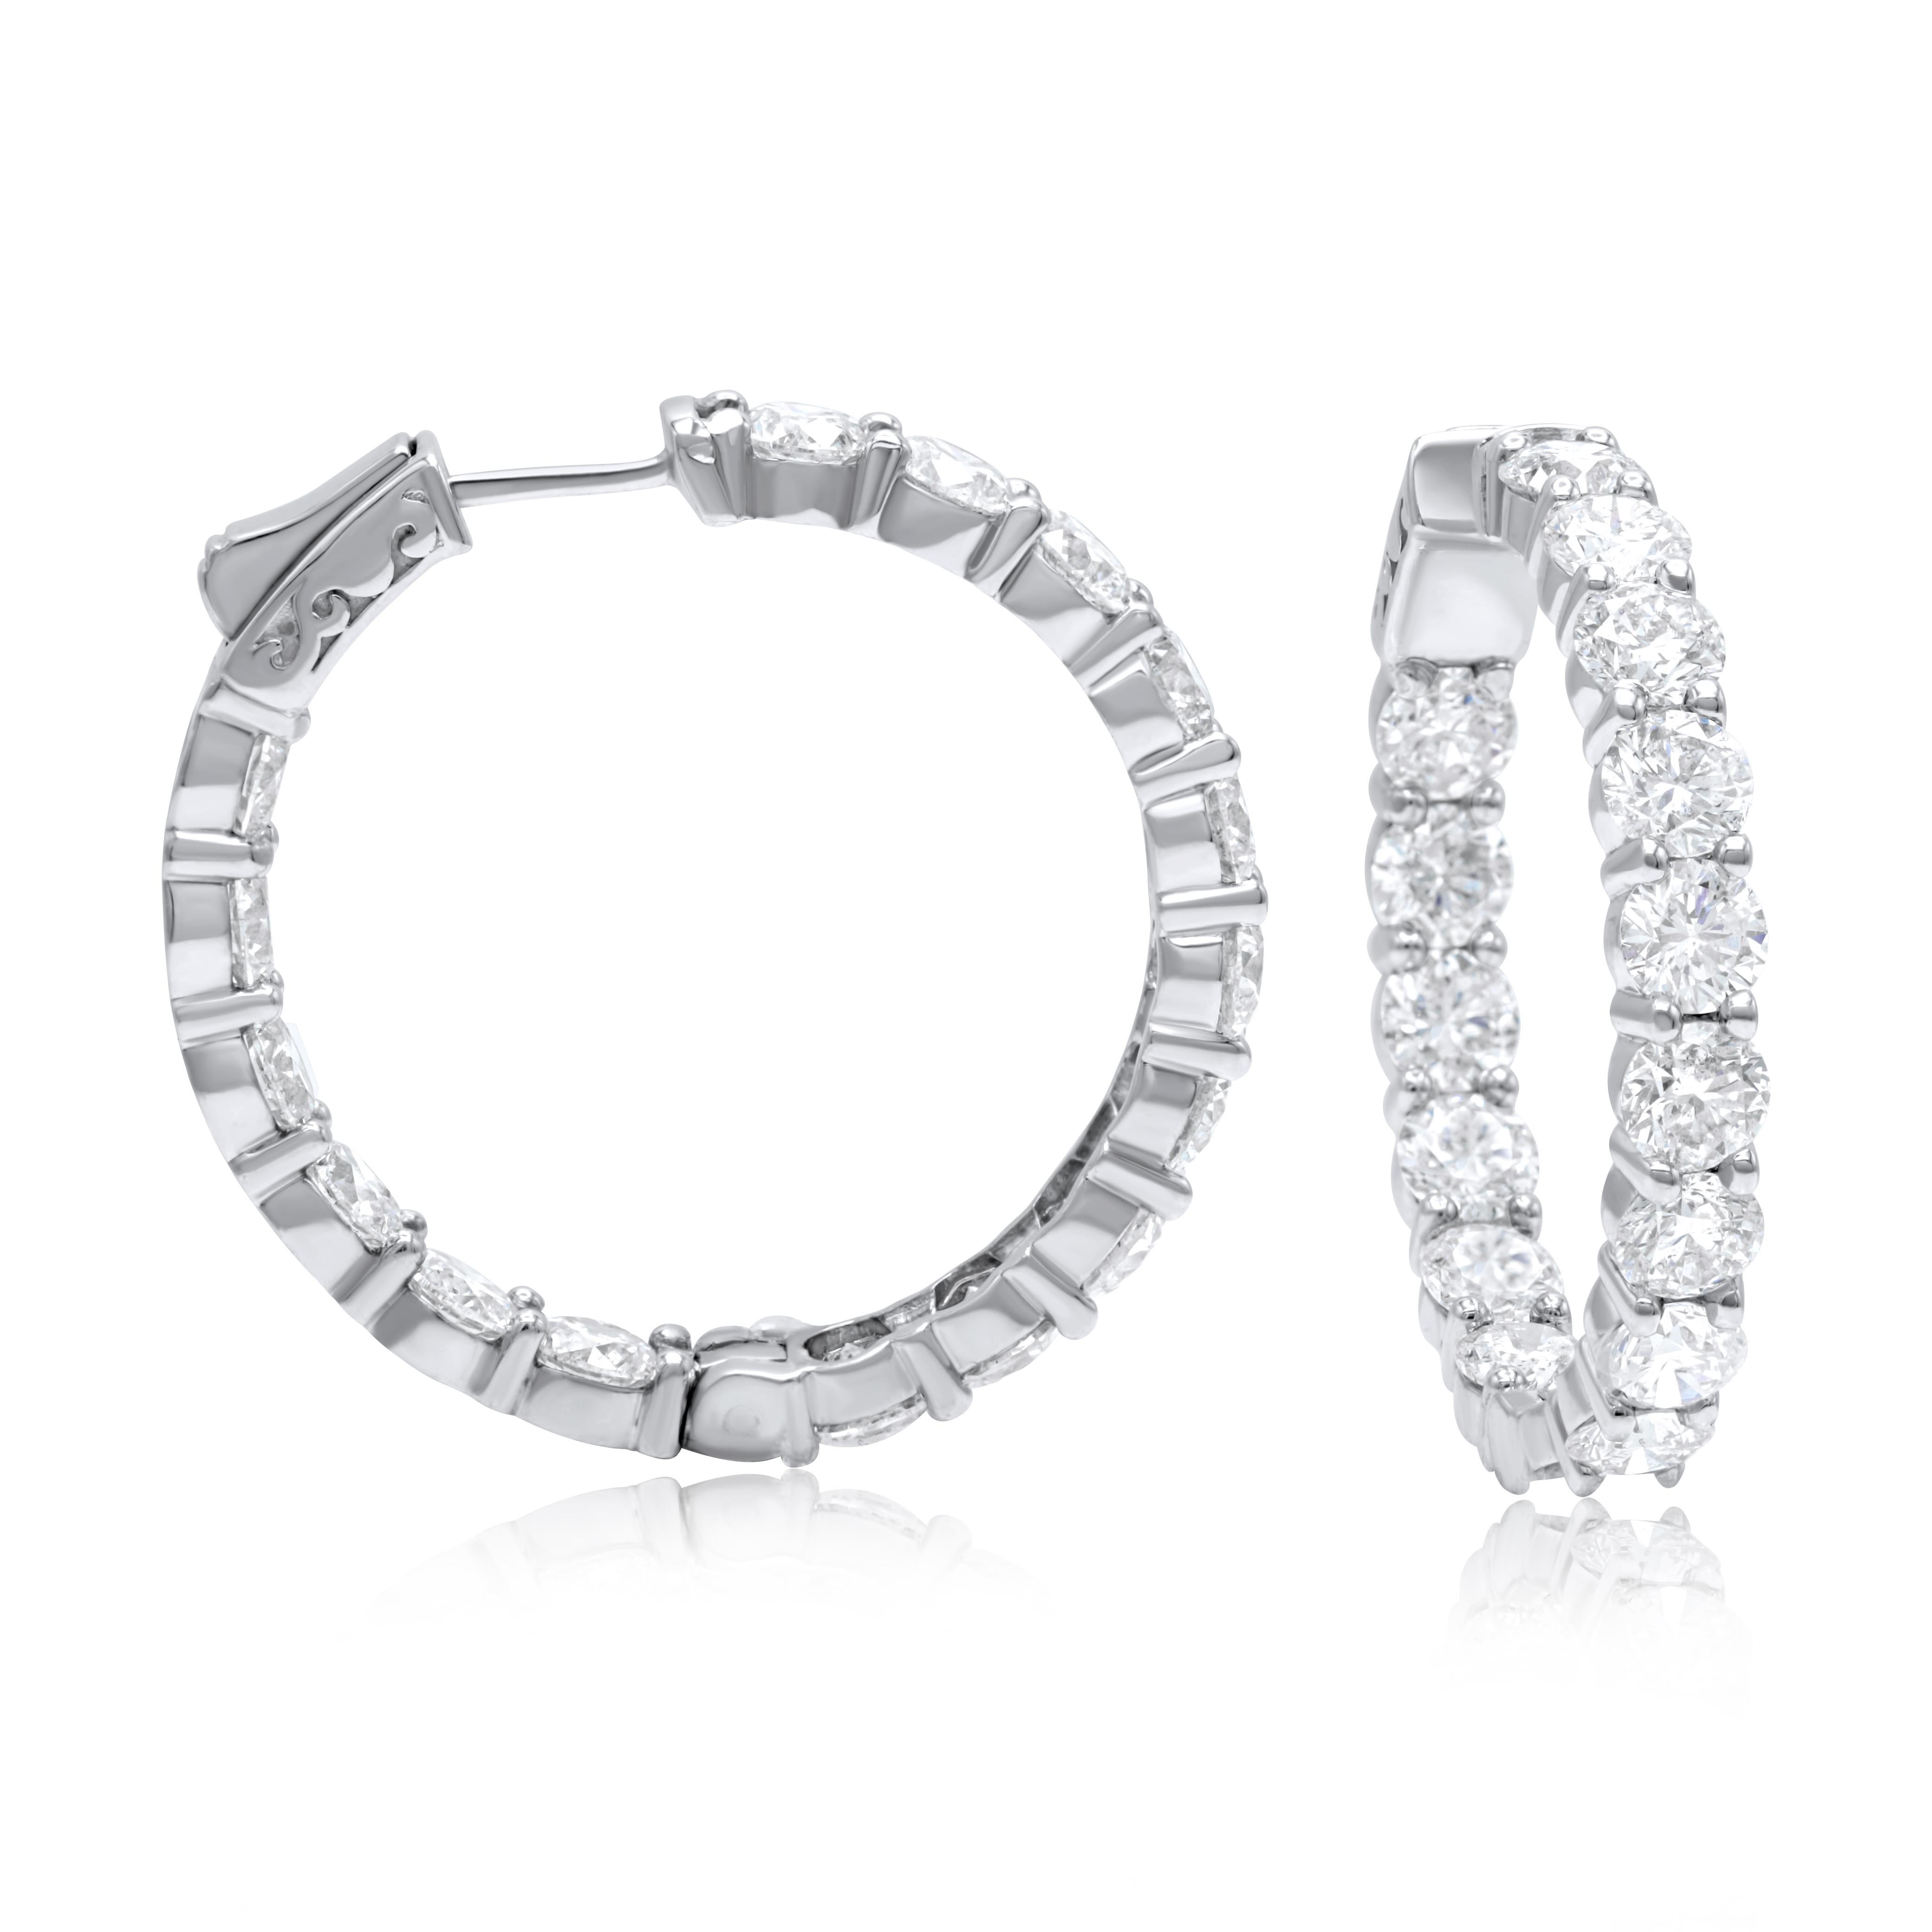 18K white gold diamond hoops with 9.20 cts of round diamonds  and 32 stones
Diana M. is a leading supplier of top-quality fine jewelry for over 35 years.
Diana M is one-stop shop for all your jewelry shopping, carrying line of diamond rings,